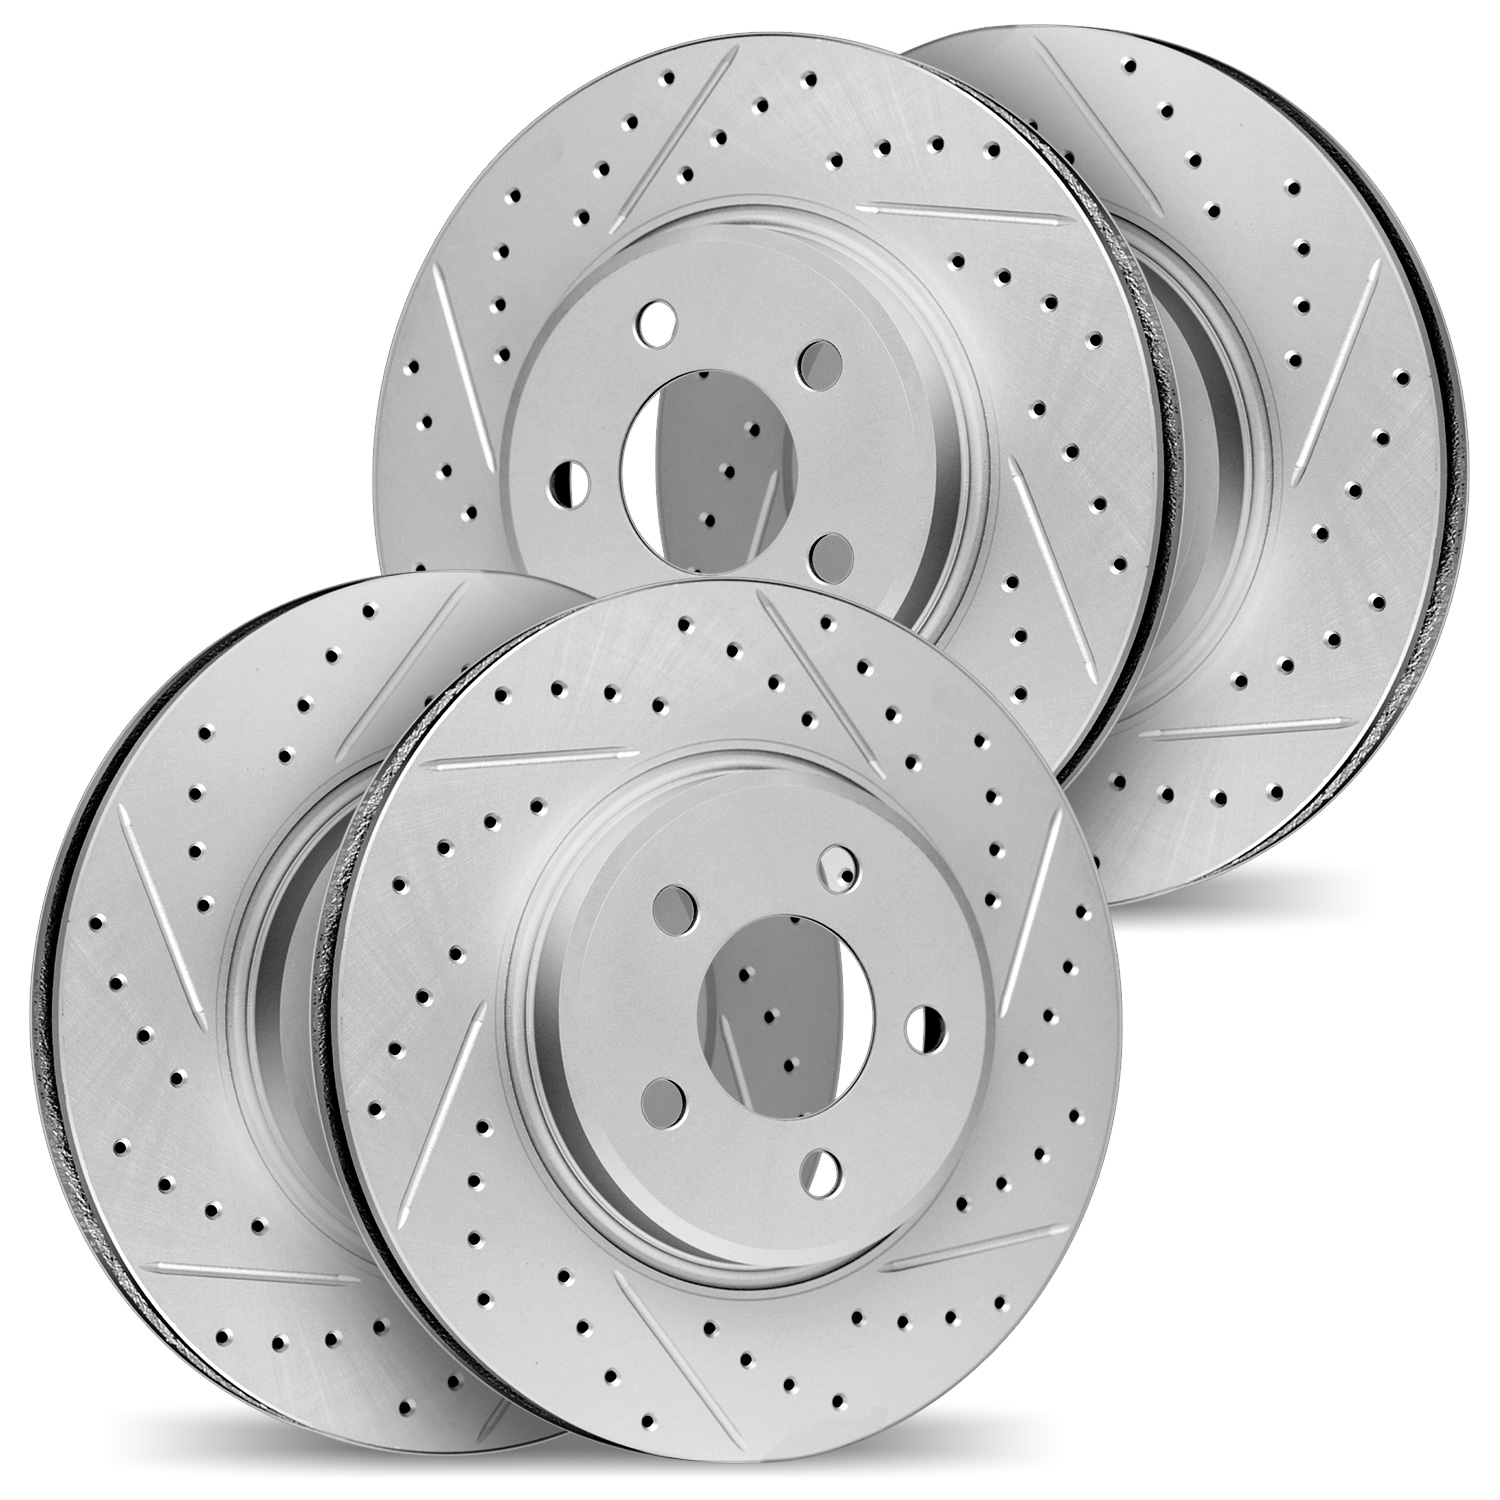 2004-31012 Geoperformance Drilled/Slotted Brake Rotors, 2013-2020 BMW, Position: Front and Rear